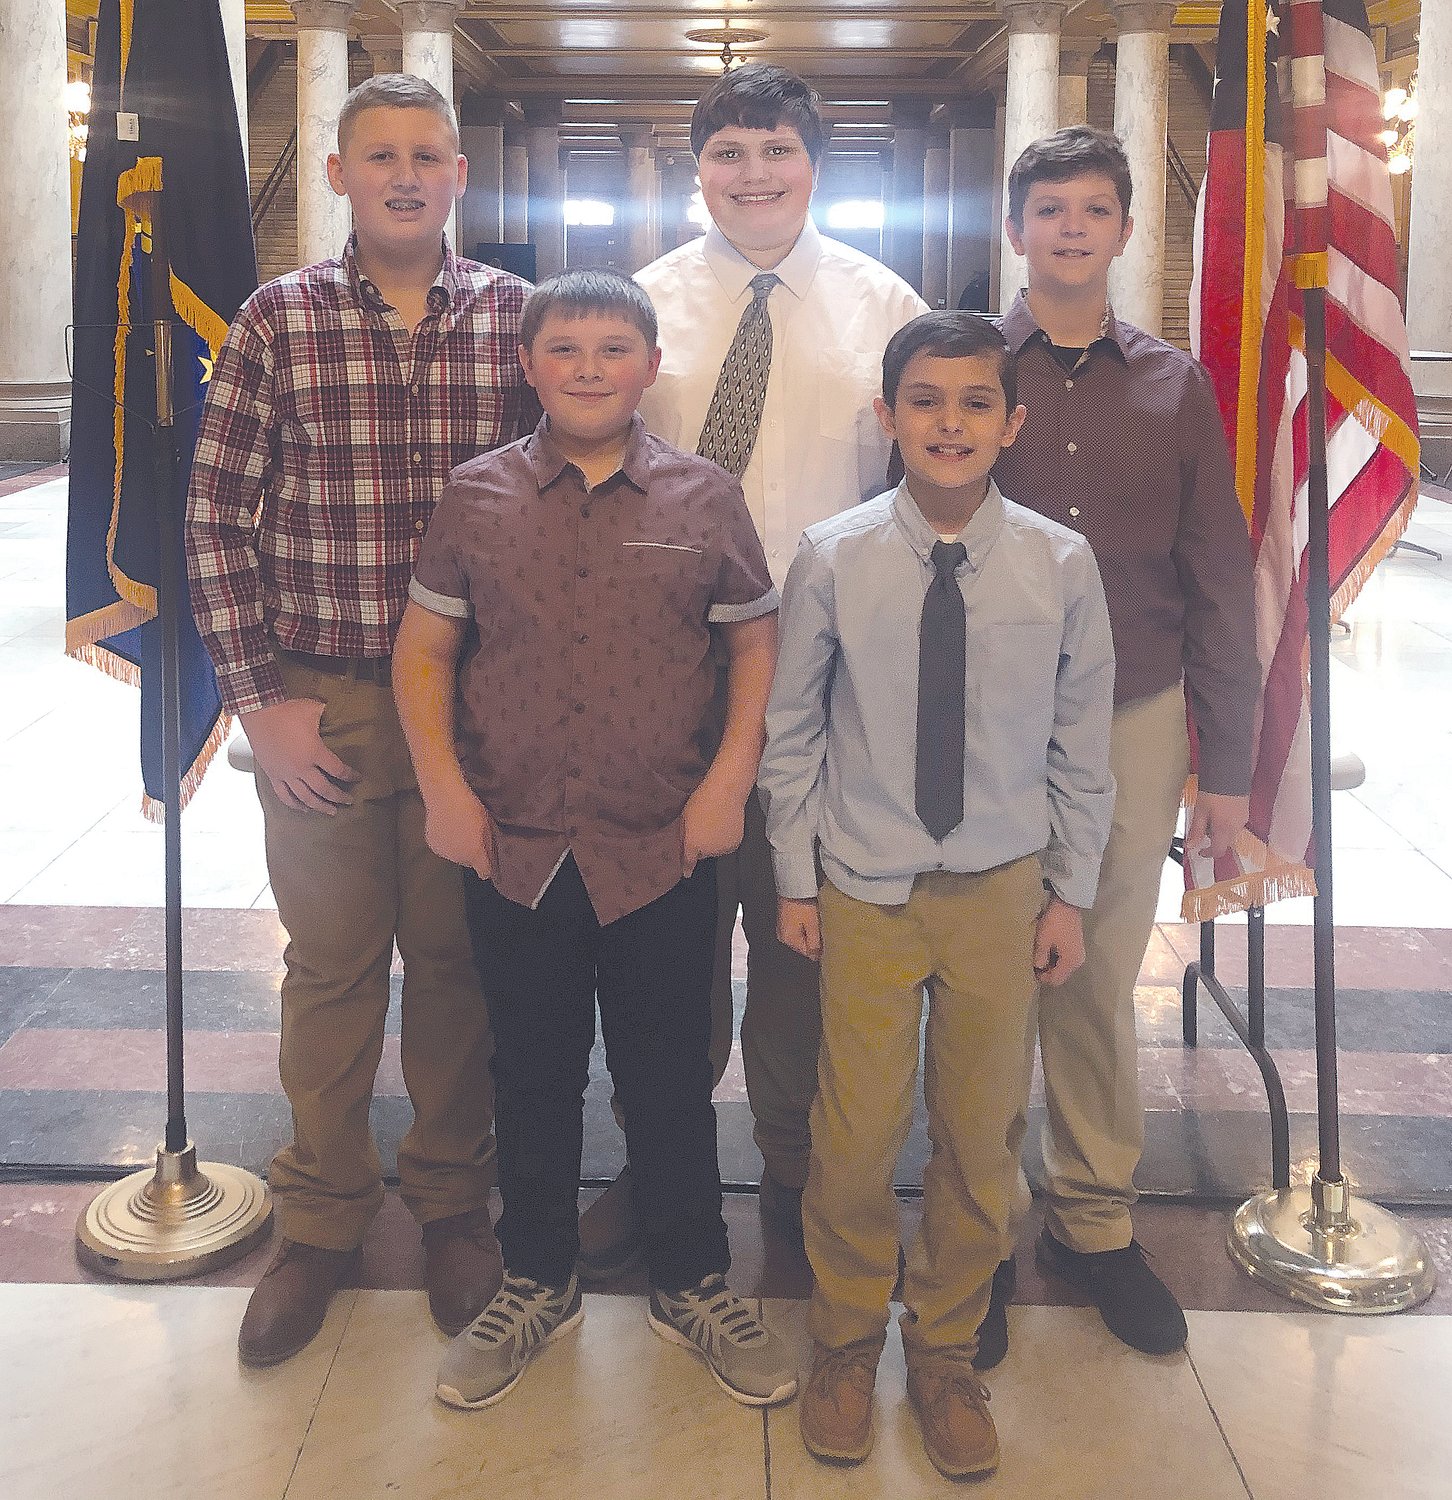 The Indiana General Assembly recognized these five students from Turkey Run Elementary and Parke Heritage Middle School for their heroic efforts on Jan. 6.